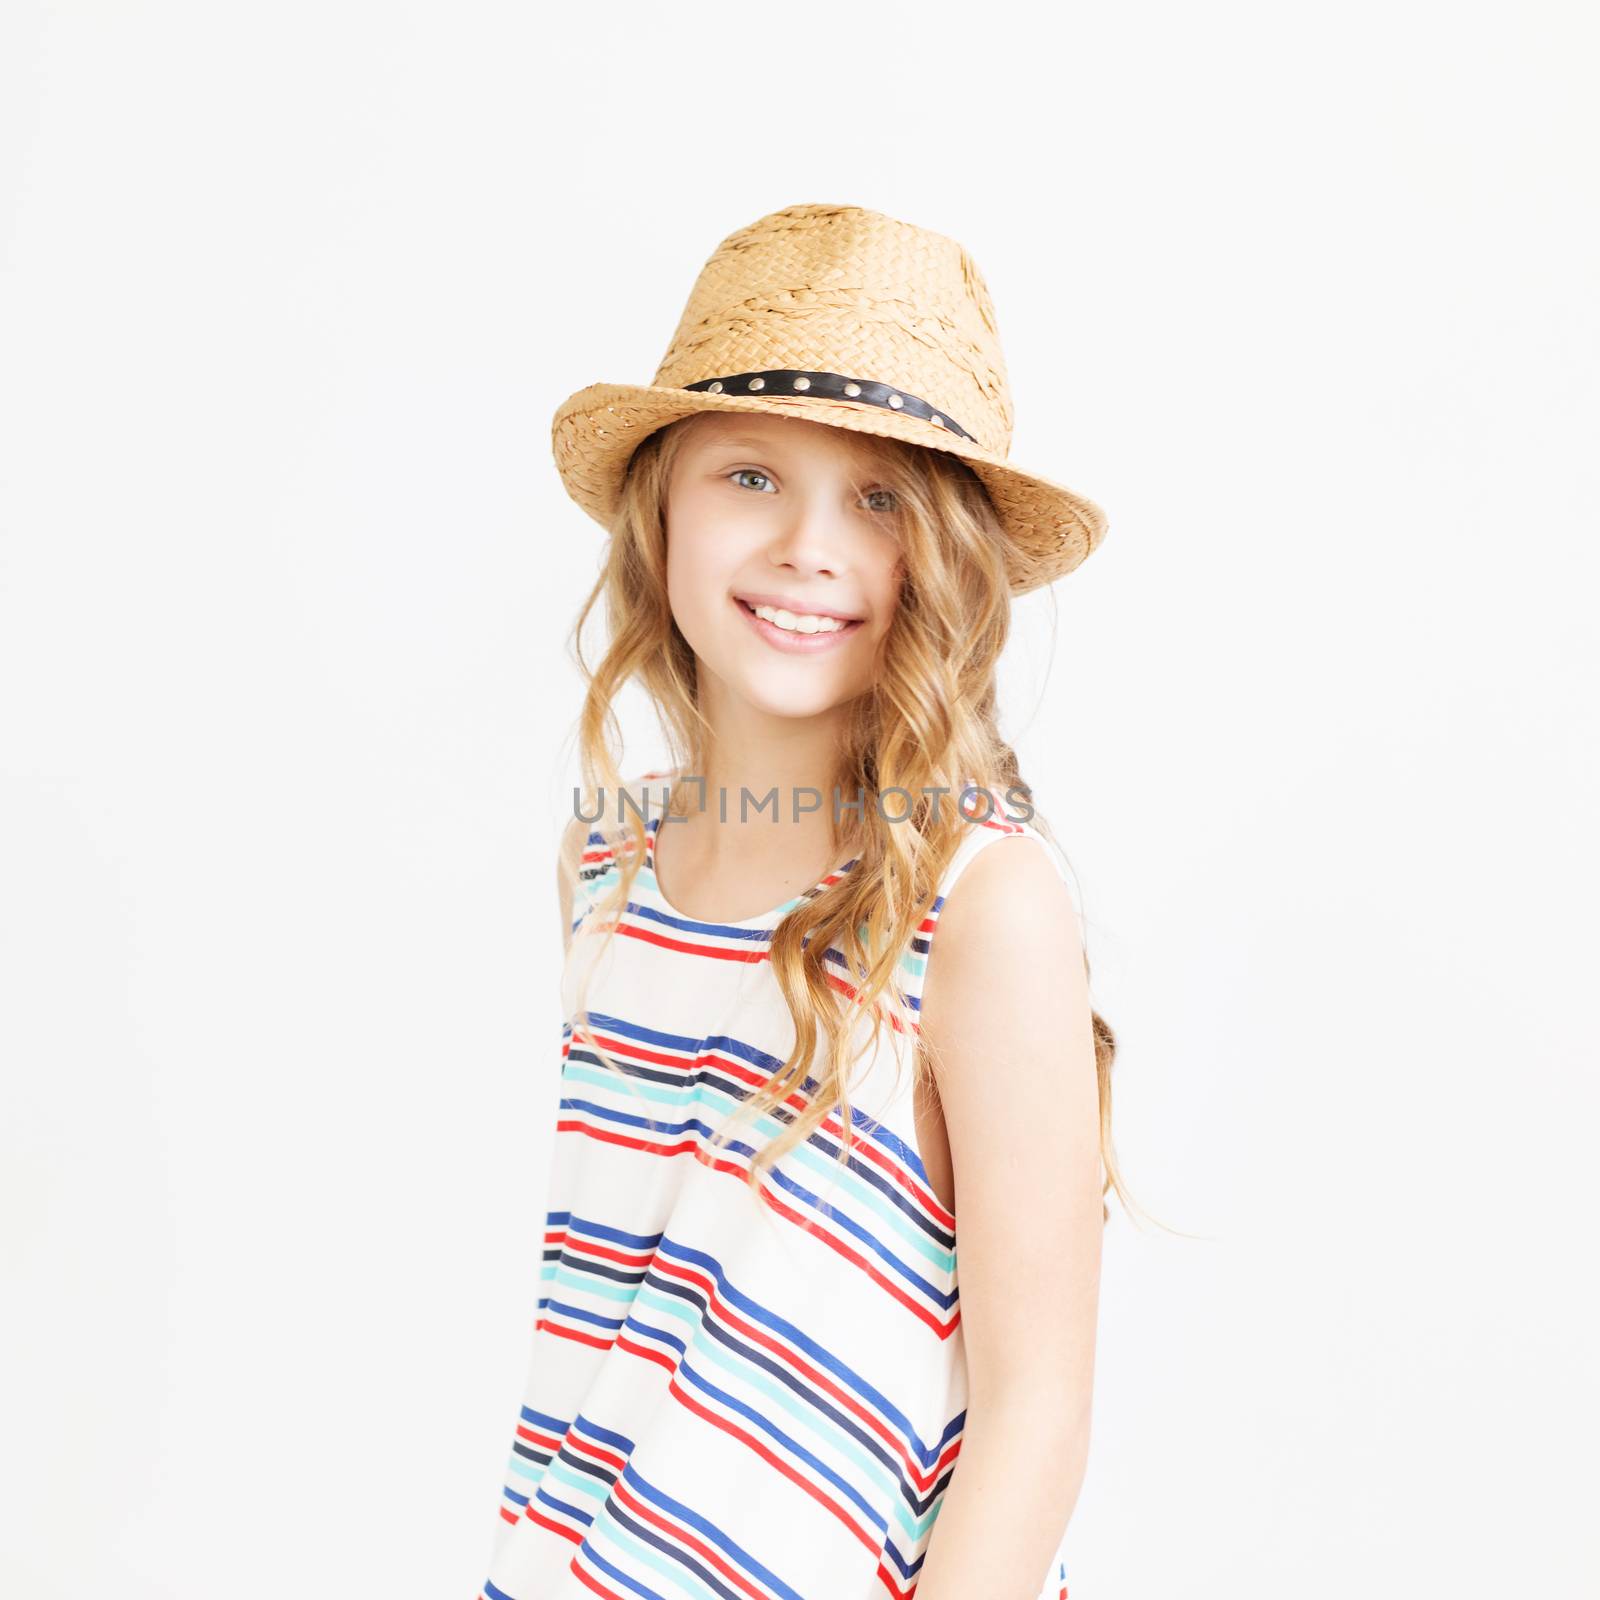 Lovely little girl with straw hat against a white background. by natazhekova